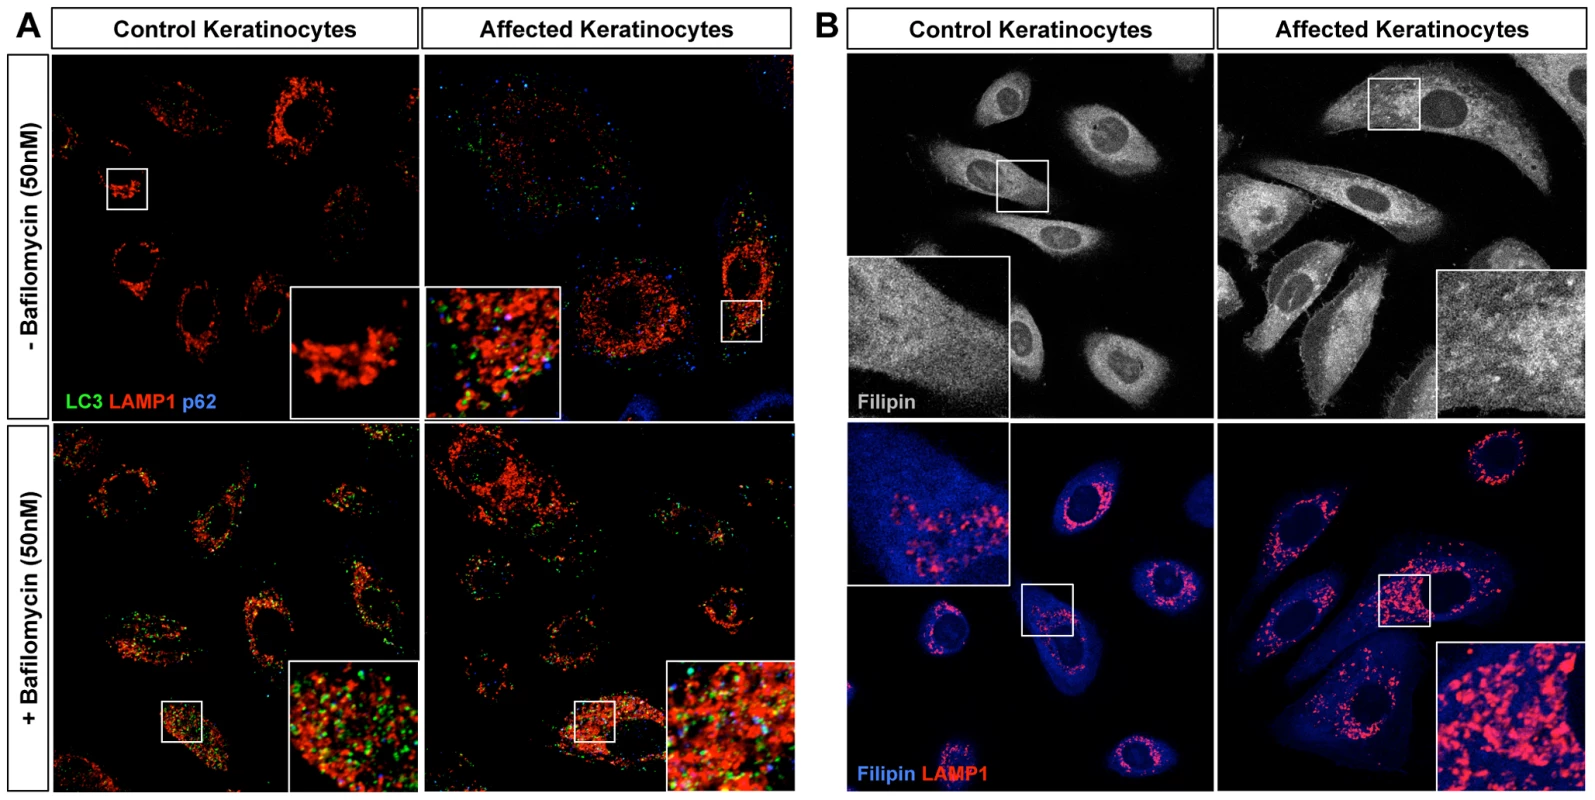 Homozygous loss-of-function of <i>ABCA5</i> perturbs lysosome function, resulting in an overall accumulation of autophagosomes and intracellular cholesterol levels in CGHT keratinocytes.